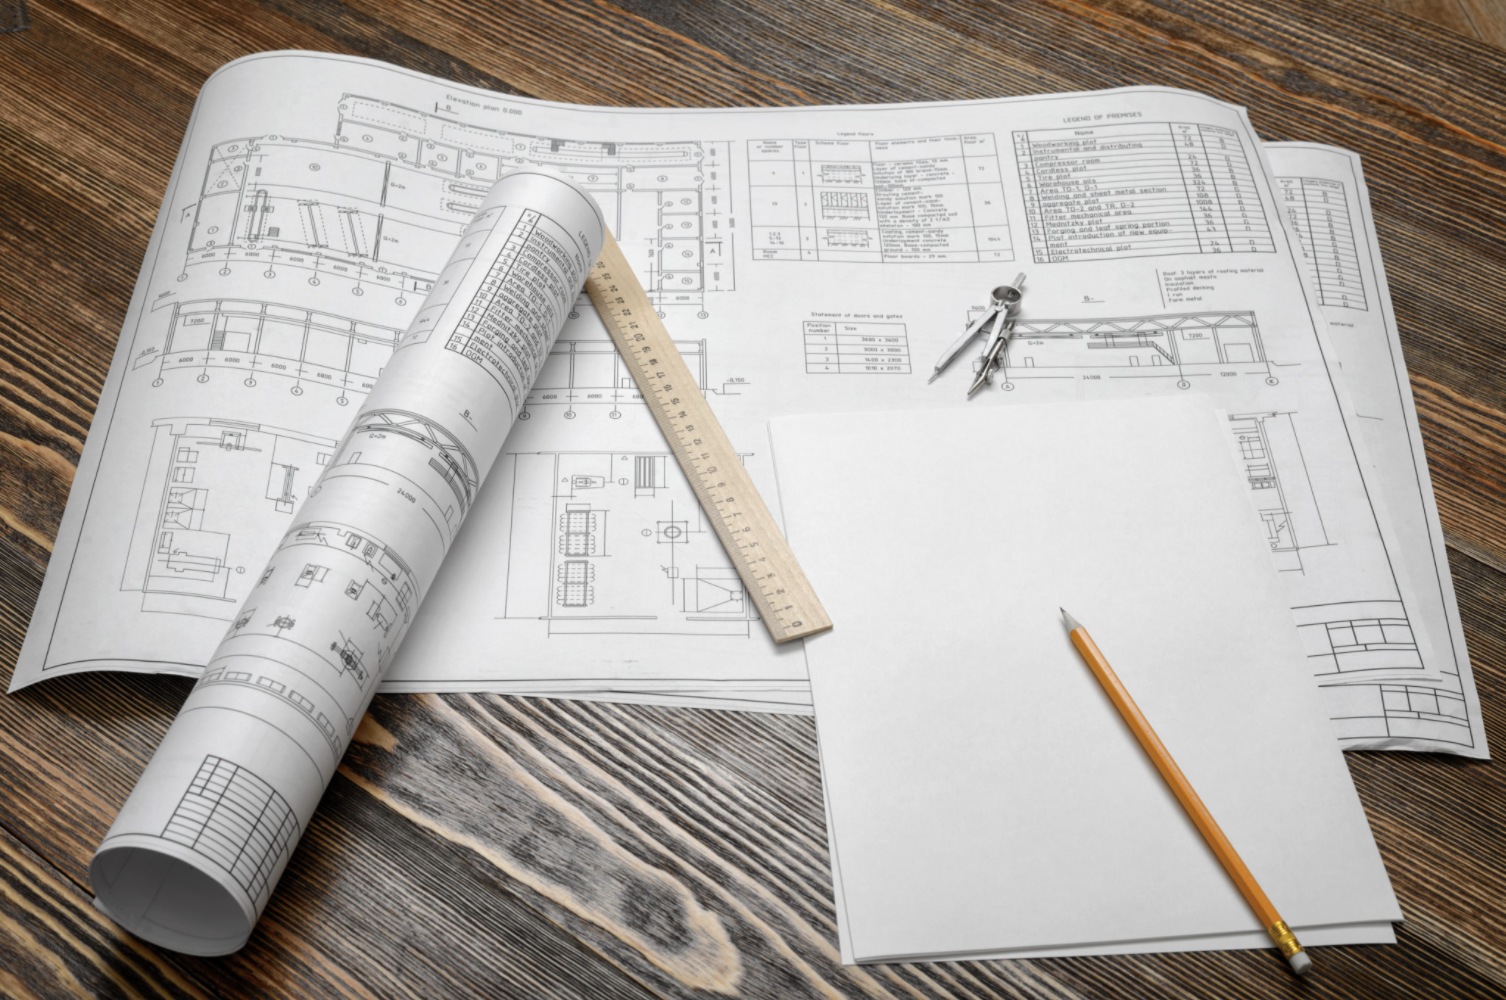 remodeling permits and blueprints